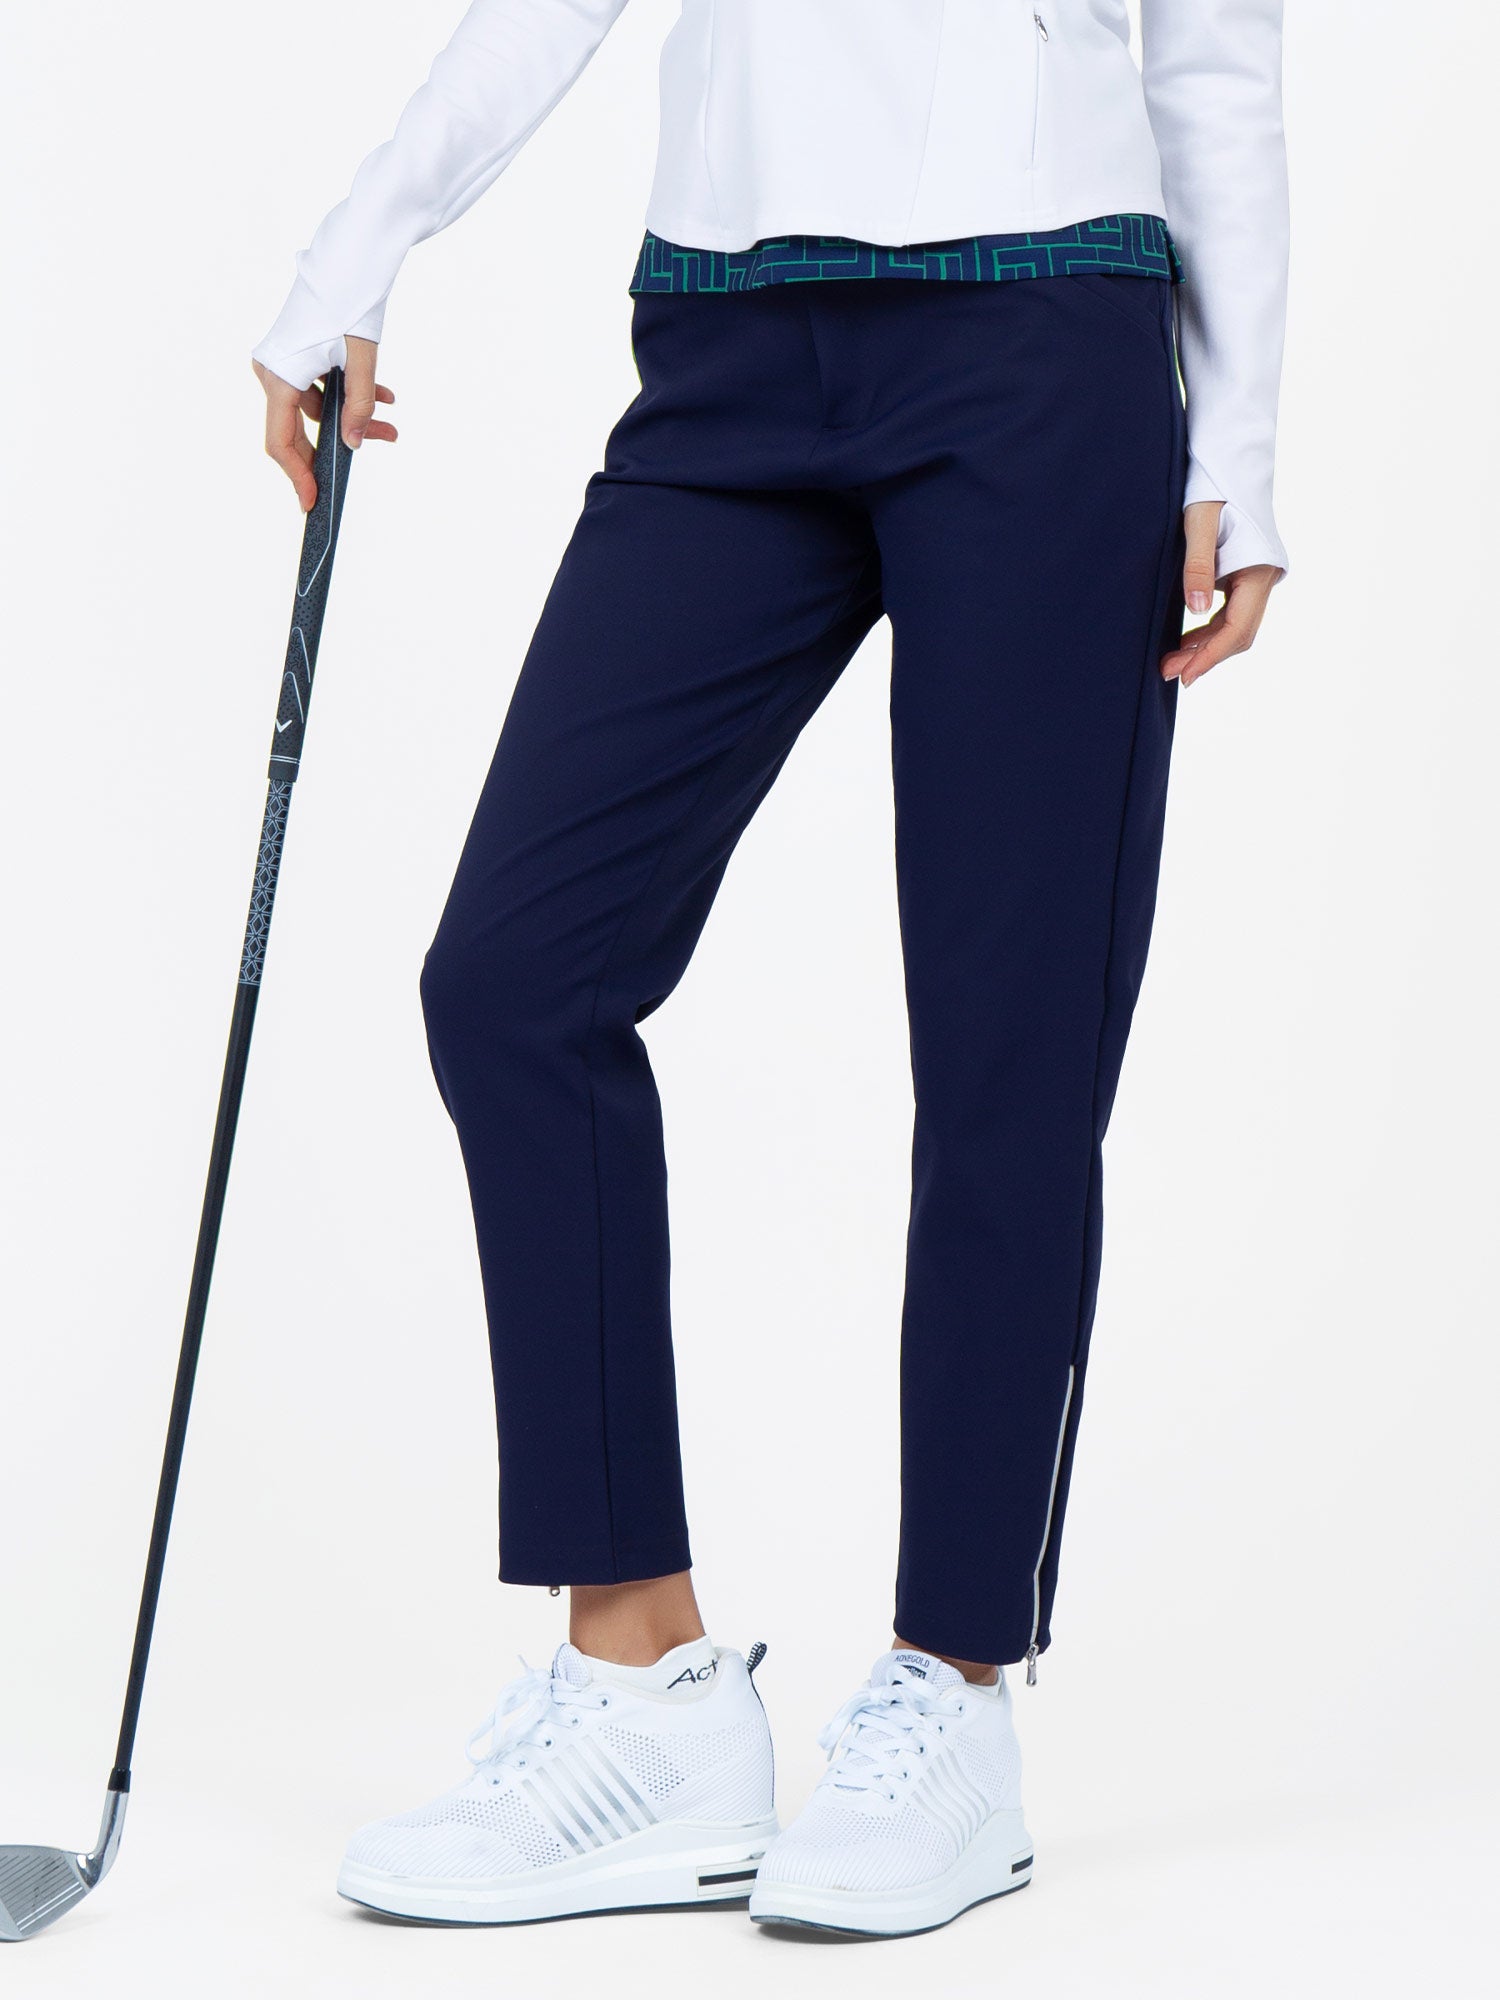 Quick Dry Women's Camila Golf Pant - Ink